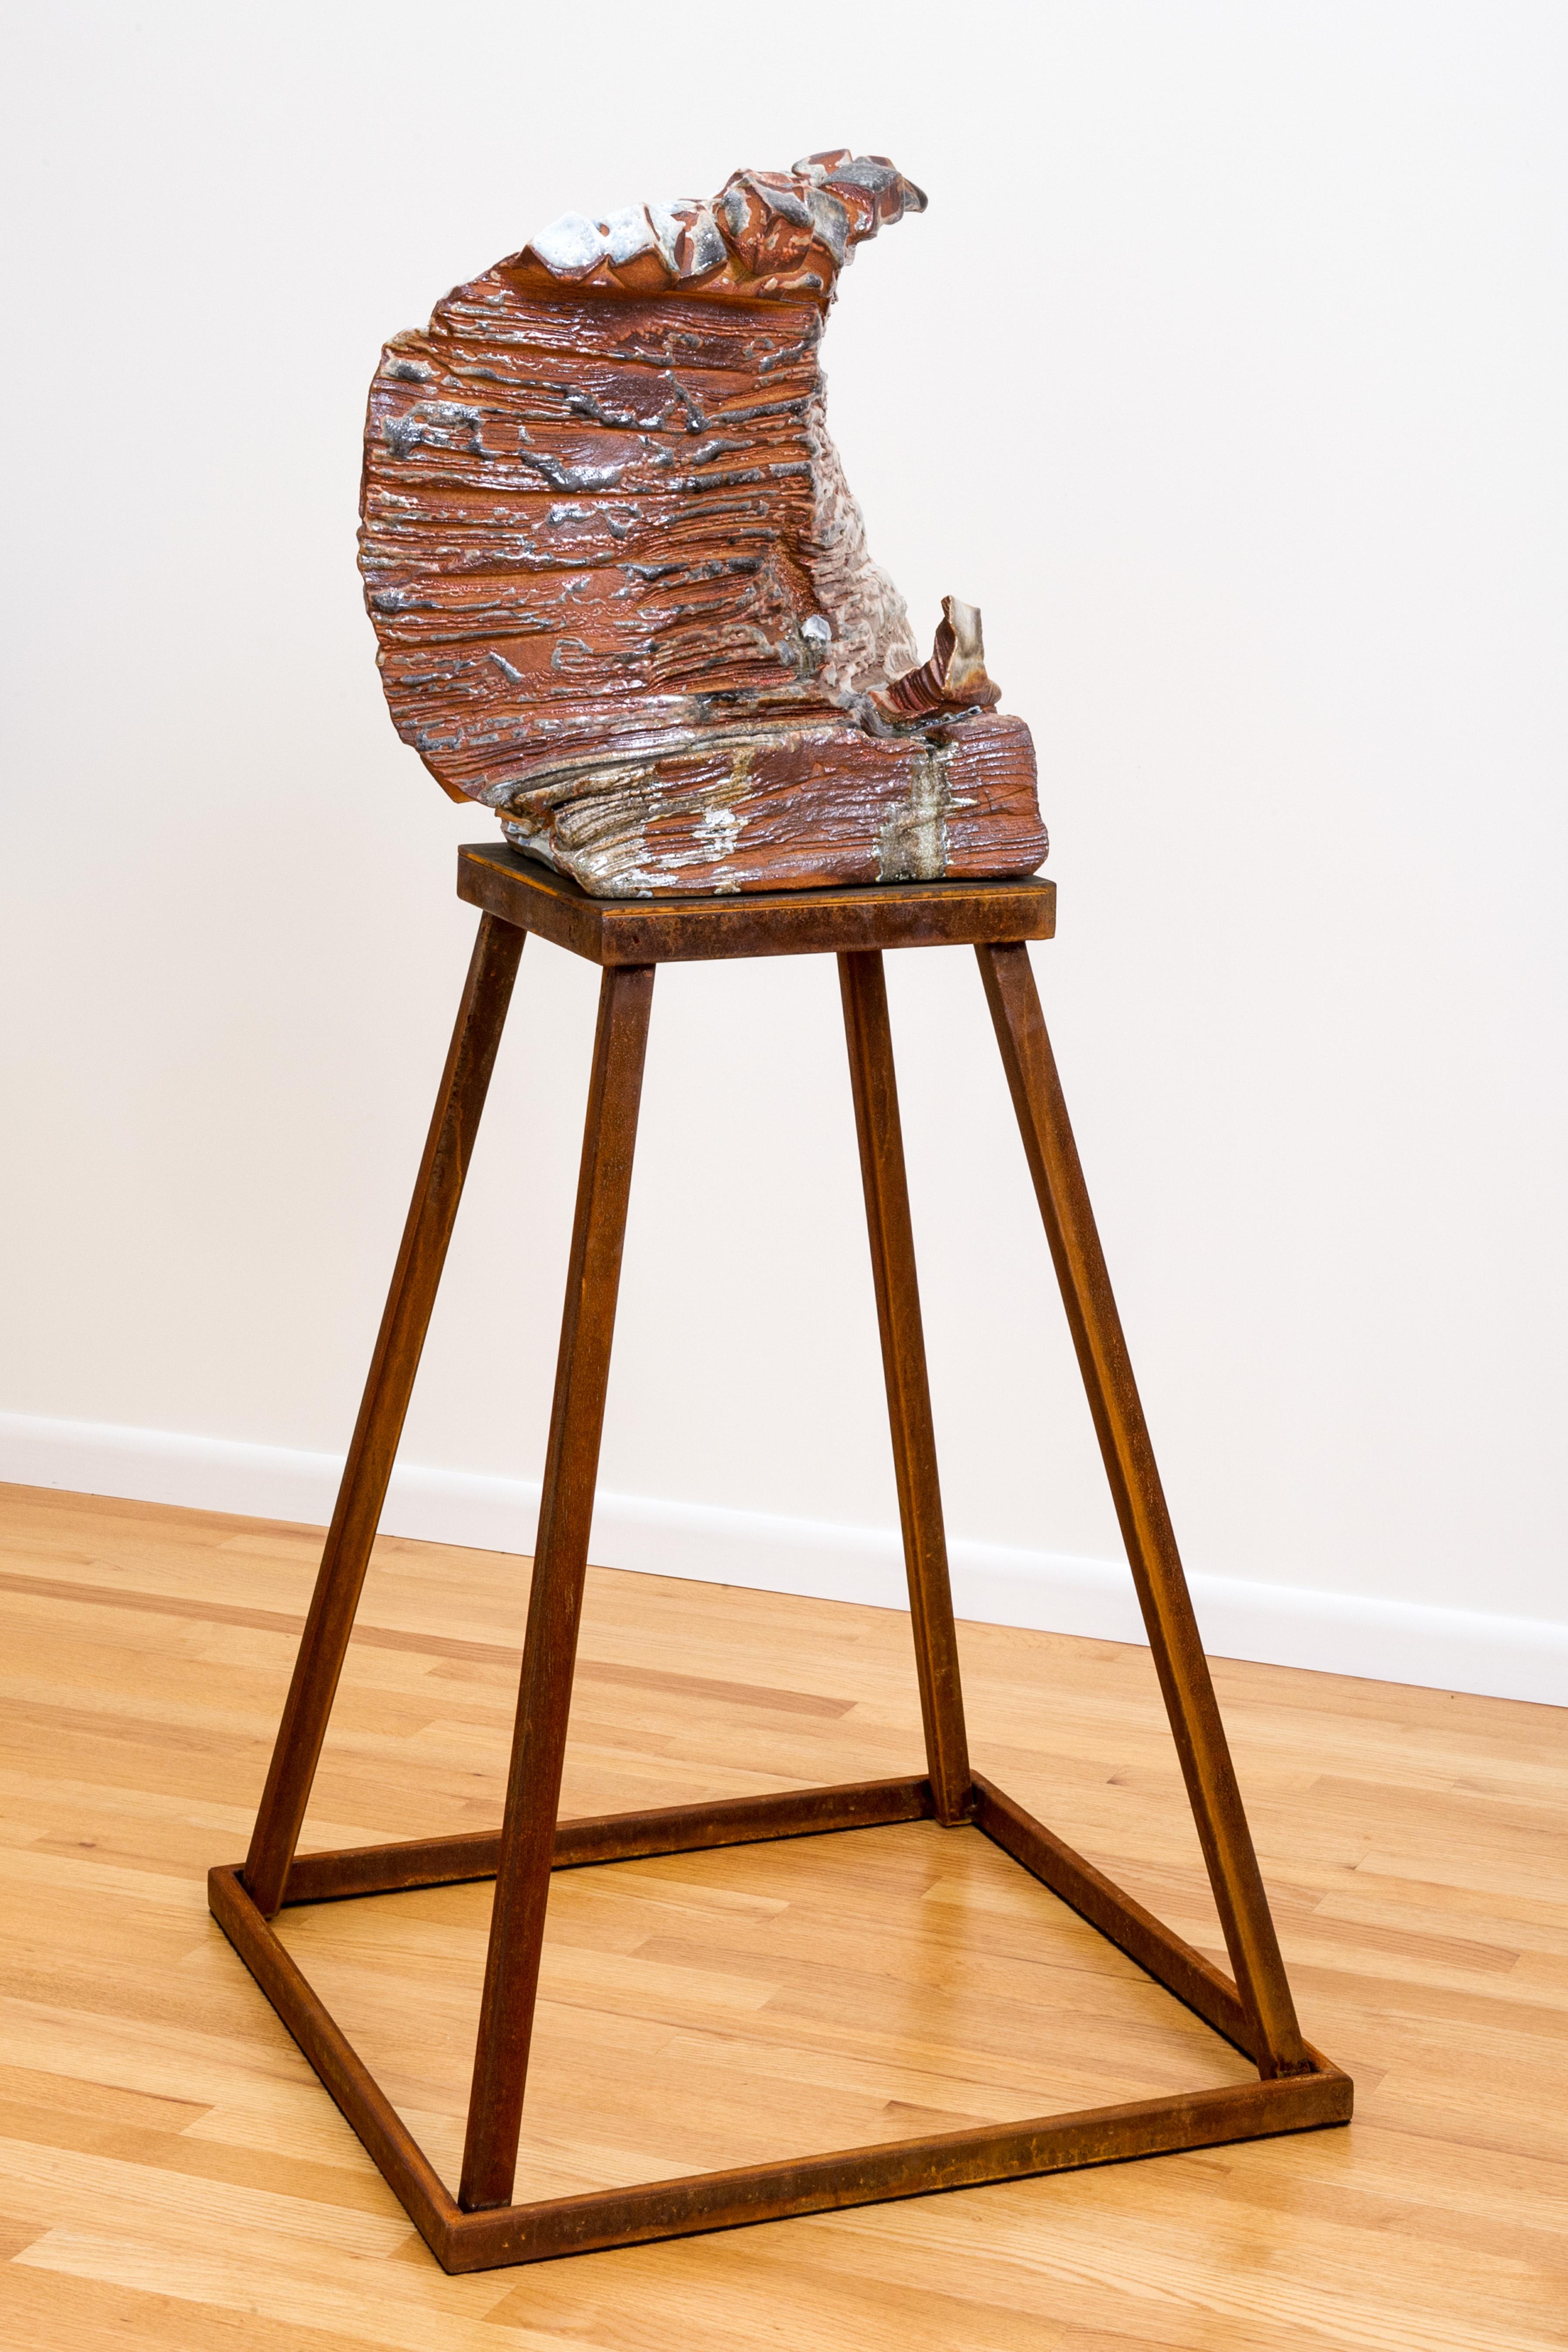 Tony Moore Abstract Sculpture - Large ceramic wood-fired sculpture: 'Apparition '